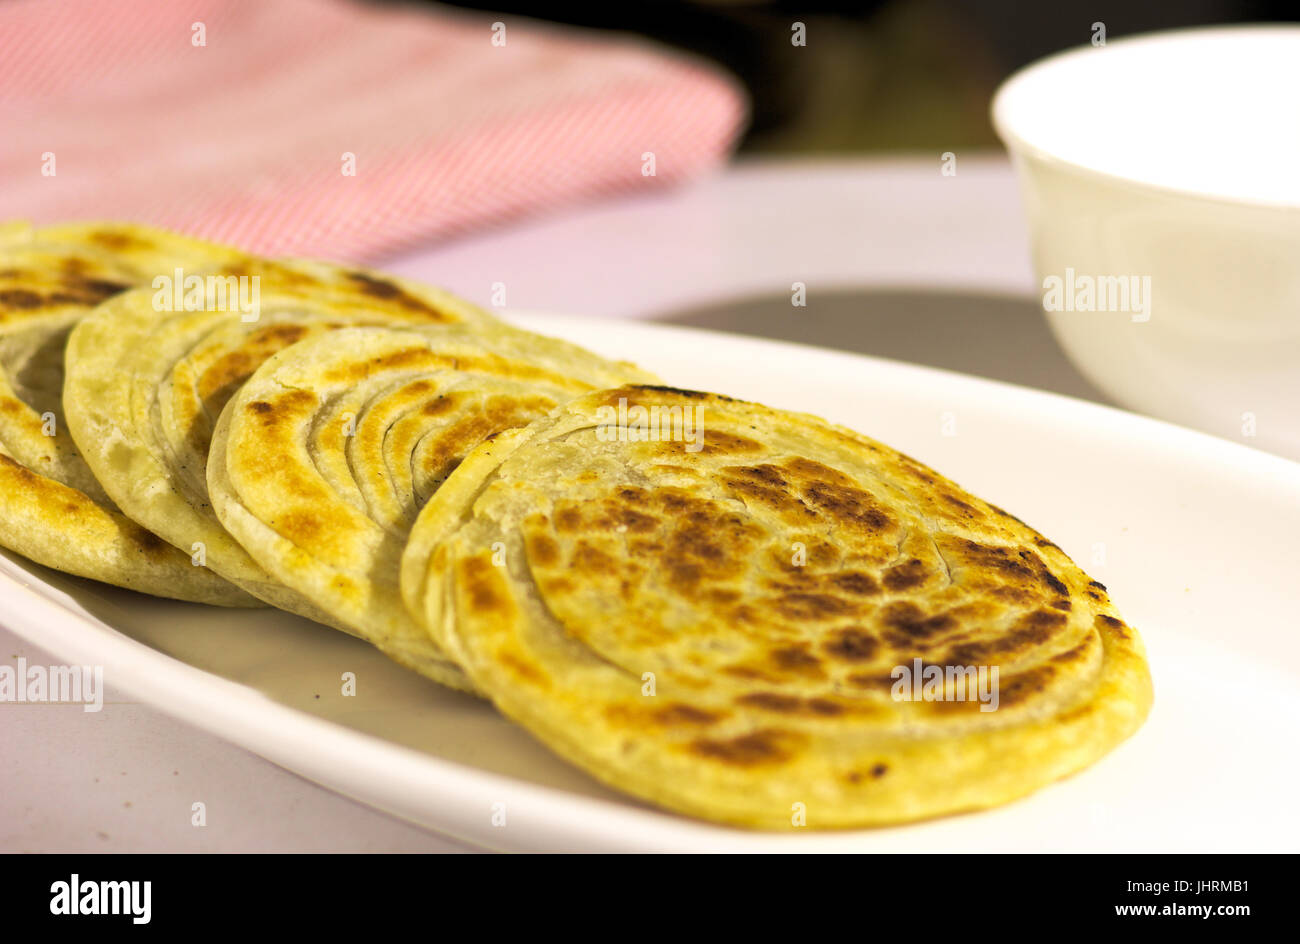 Kerala paratha is a tasty South Indian Dish usually served with a spicy side dish. Stock Photo